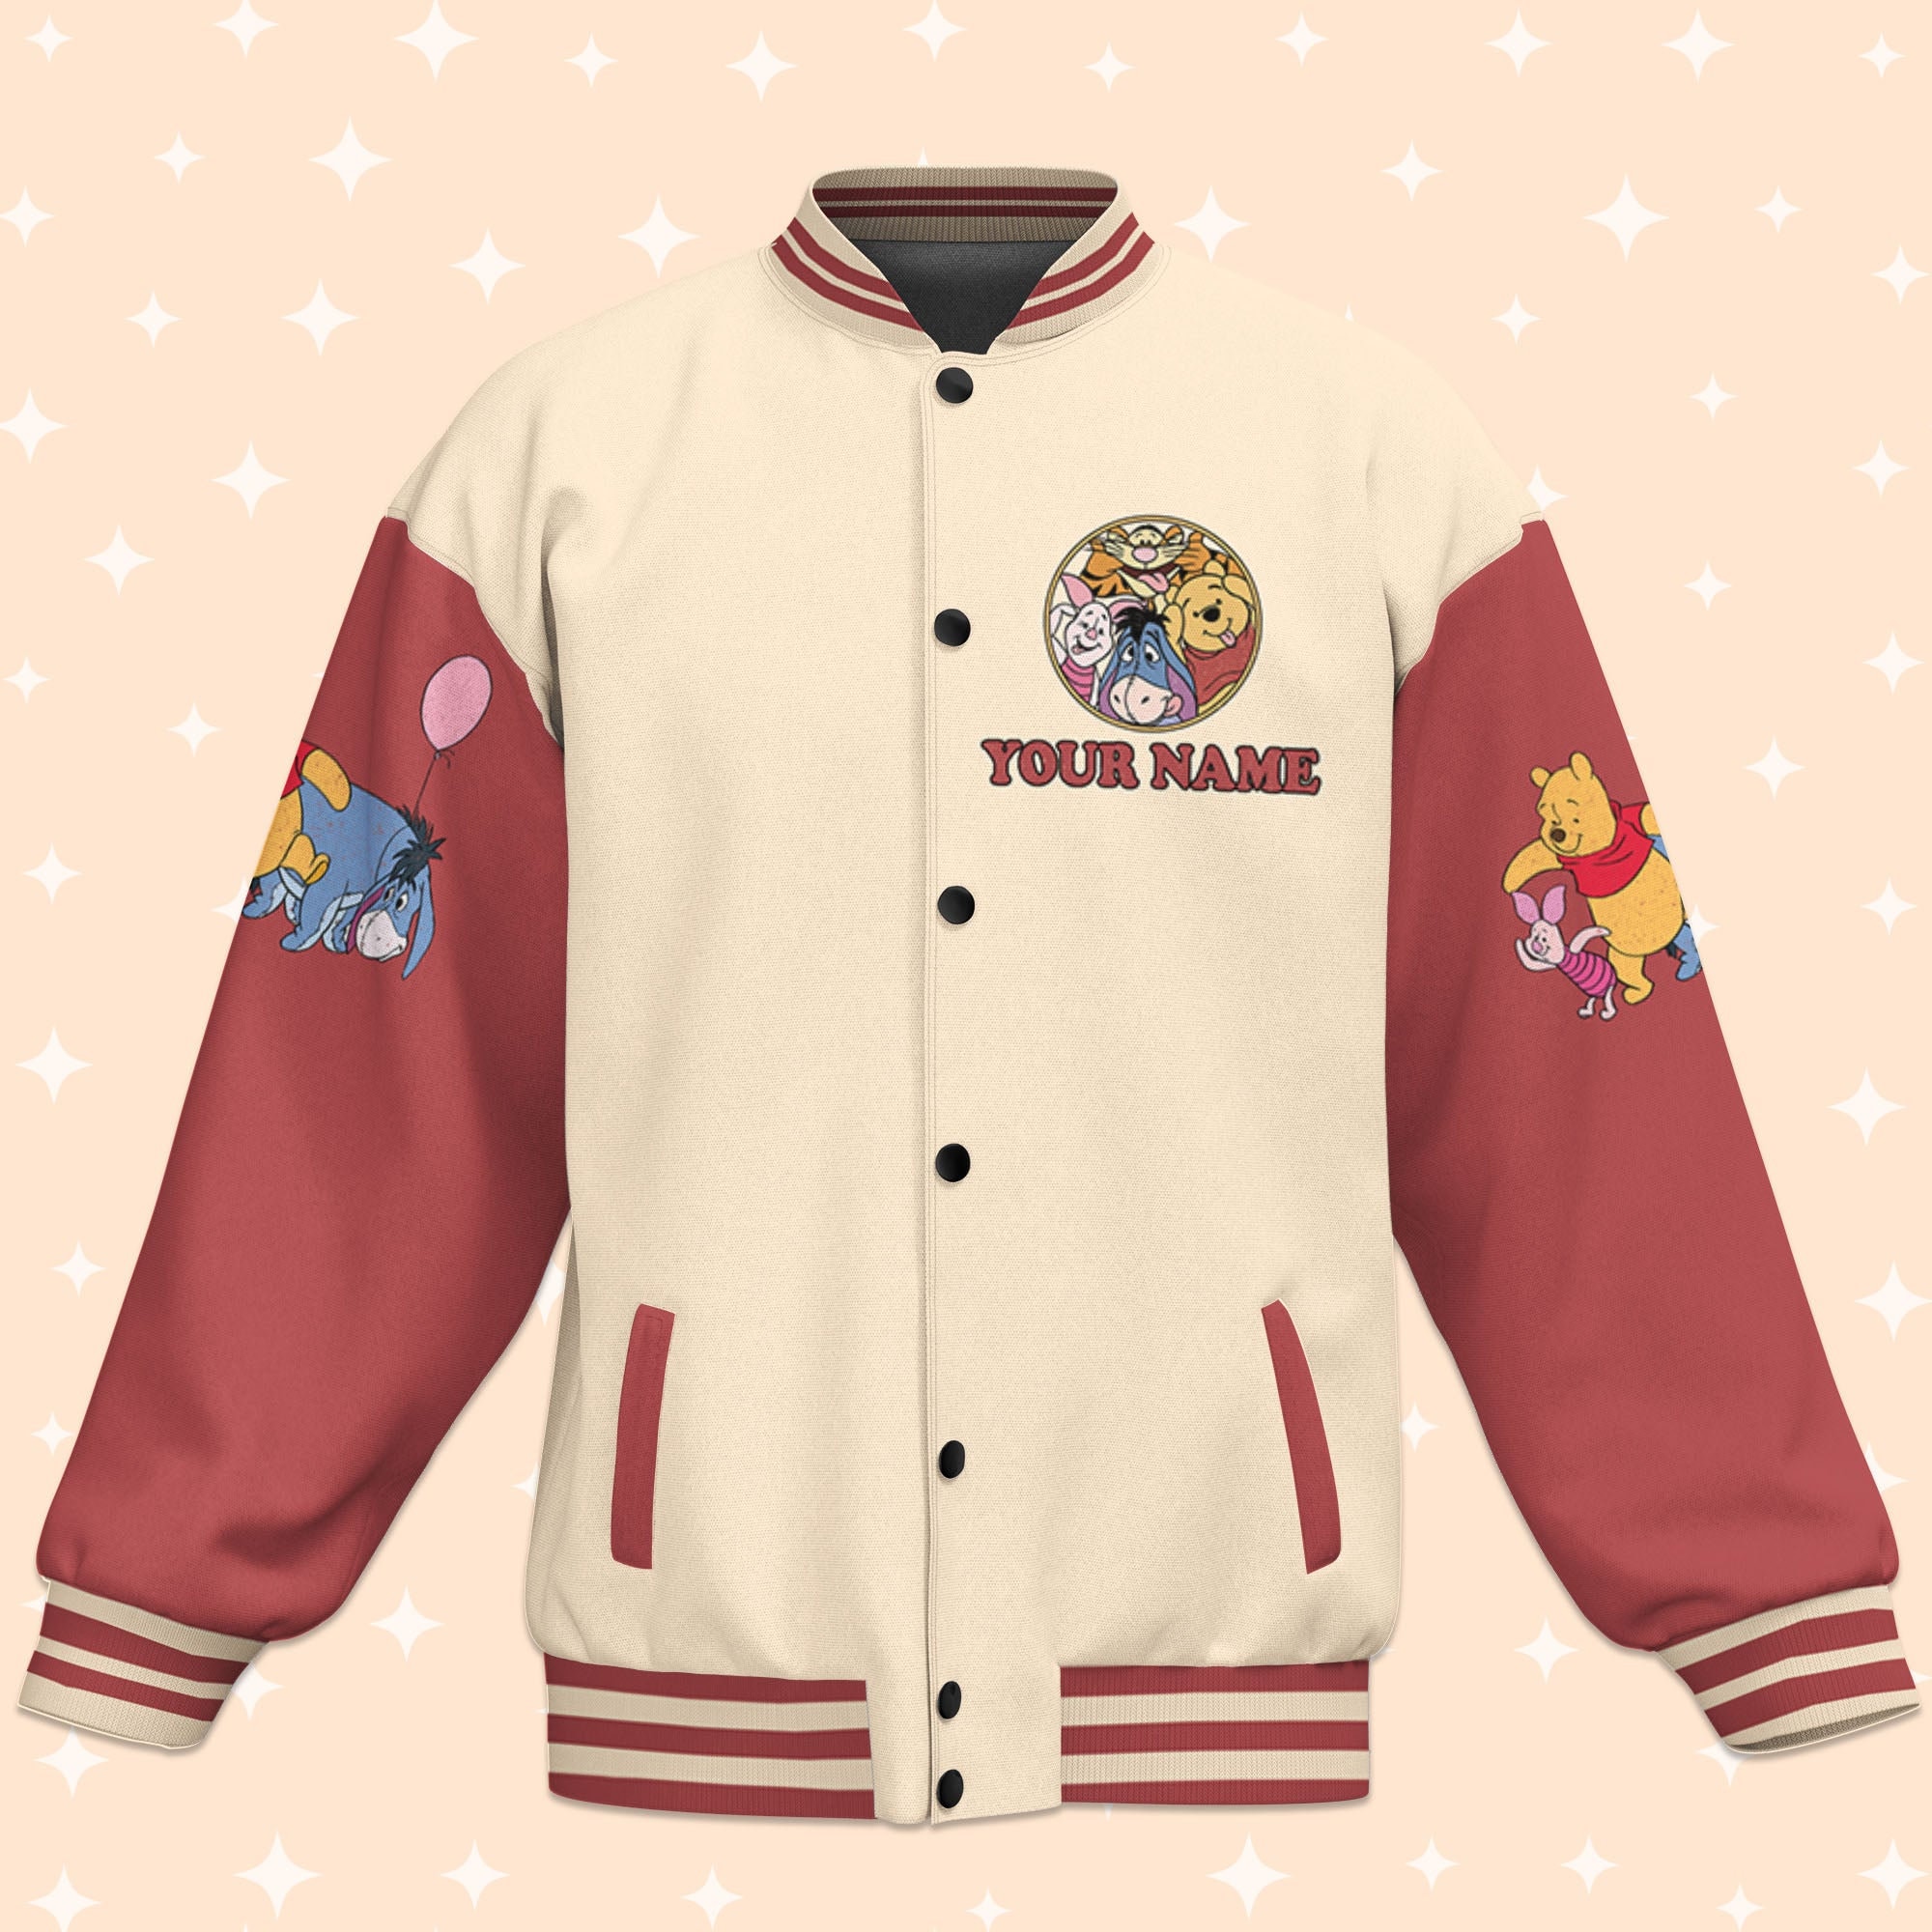 Personalize Winnie The Pooh And Co Baseball Jackets, Baseball Team Outfit